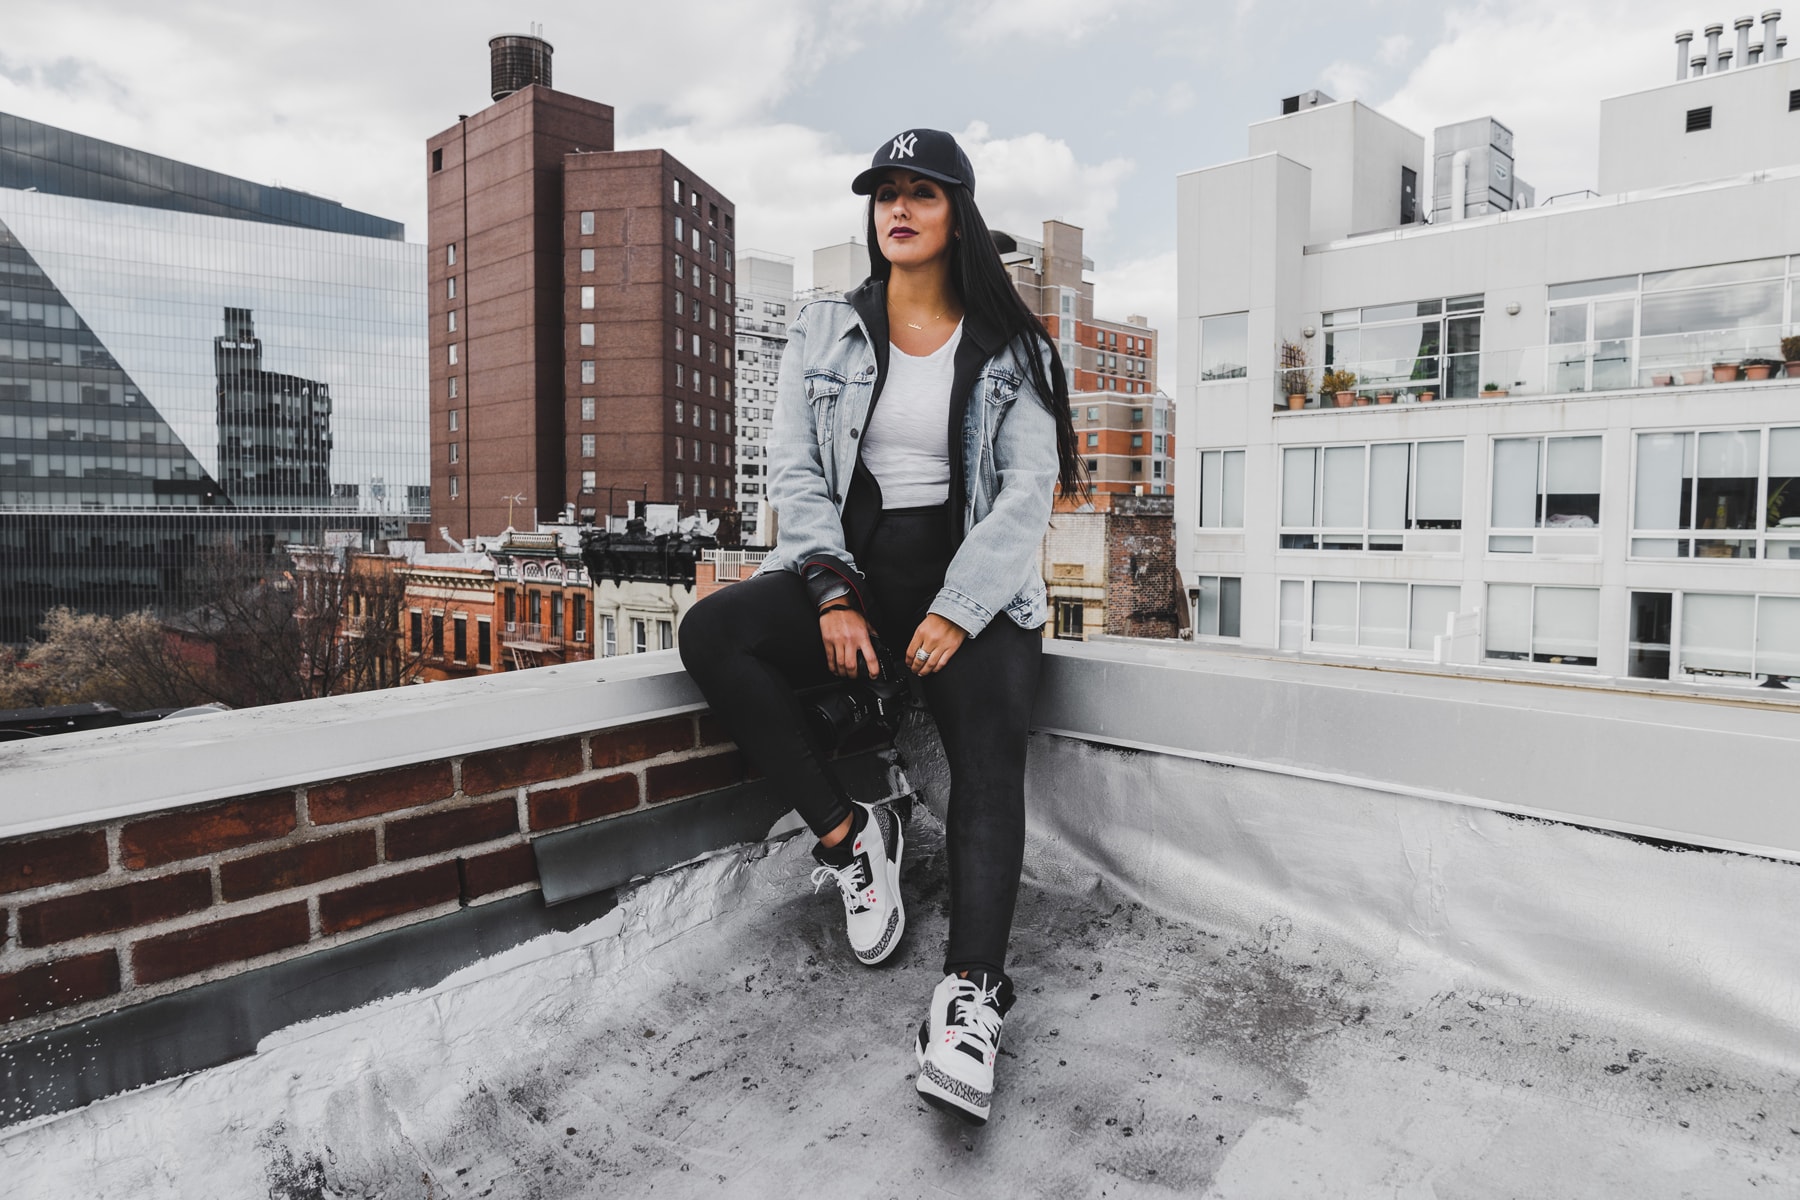 Natalie Amrossi Misshattan HIDDEN HYPEBEAST Aerial Photography Helicopter KITH Ronnie Fieg Canon Photos Instagram Scenic New York City Roof